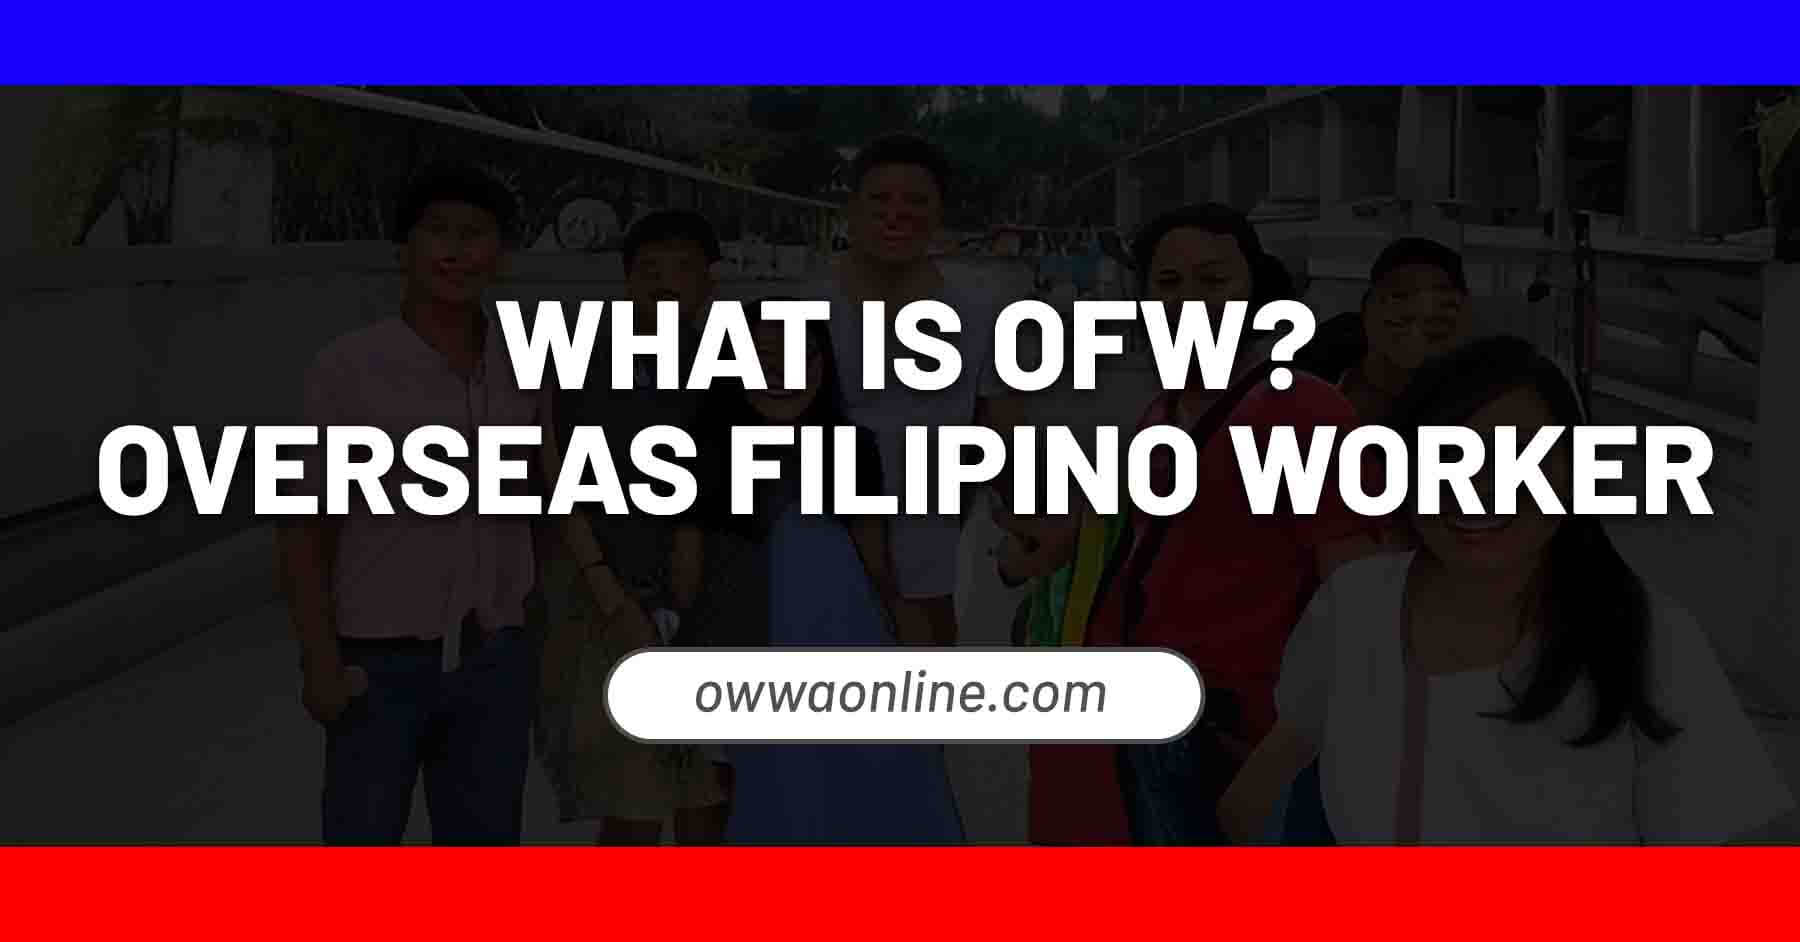 what is ofw meaning overseas filipino worker